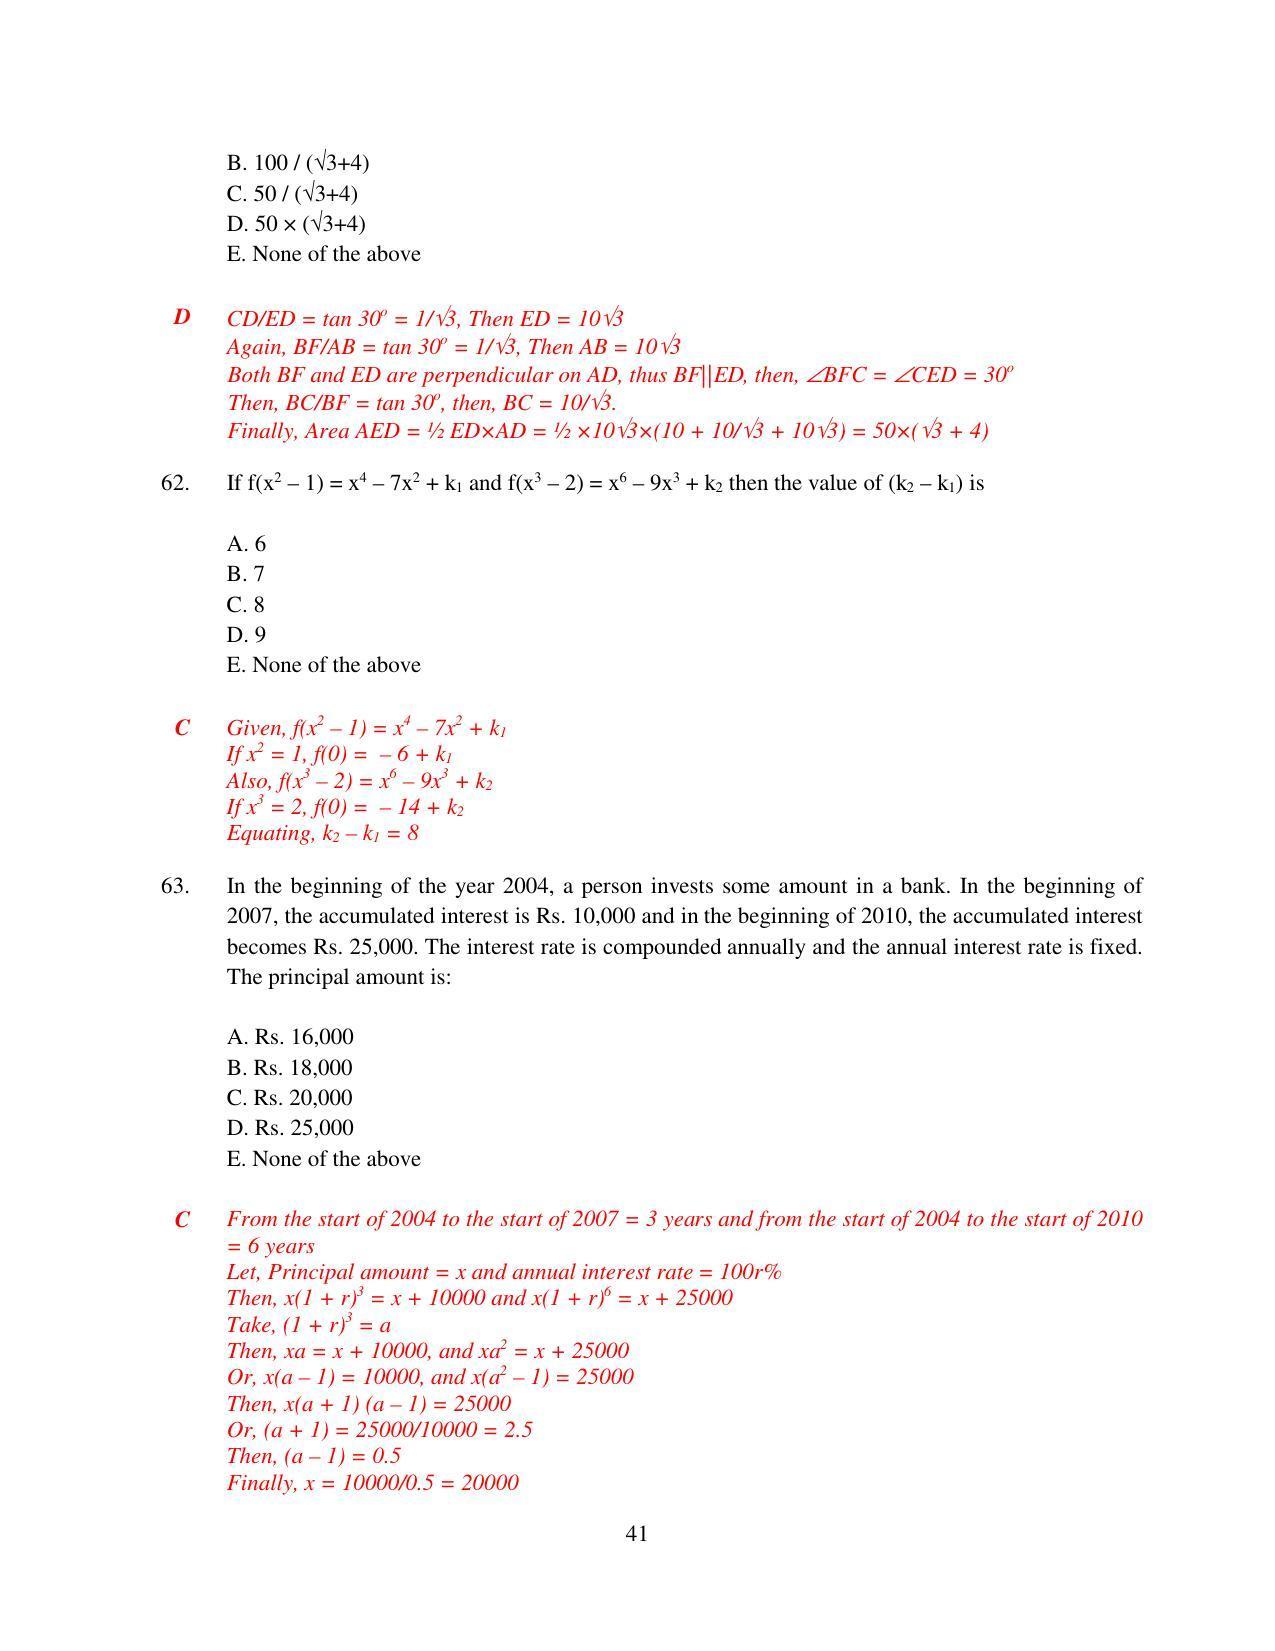 XAT 2015 Set D Question Papers - Page 42